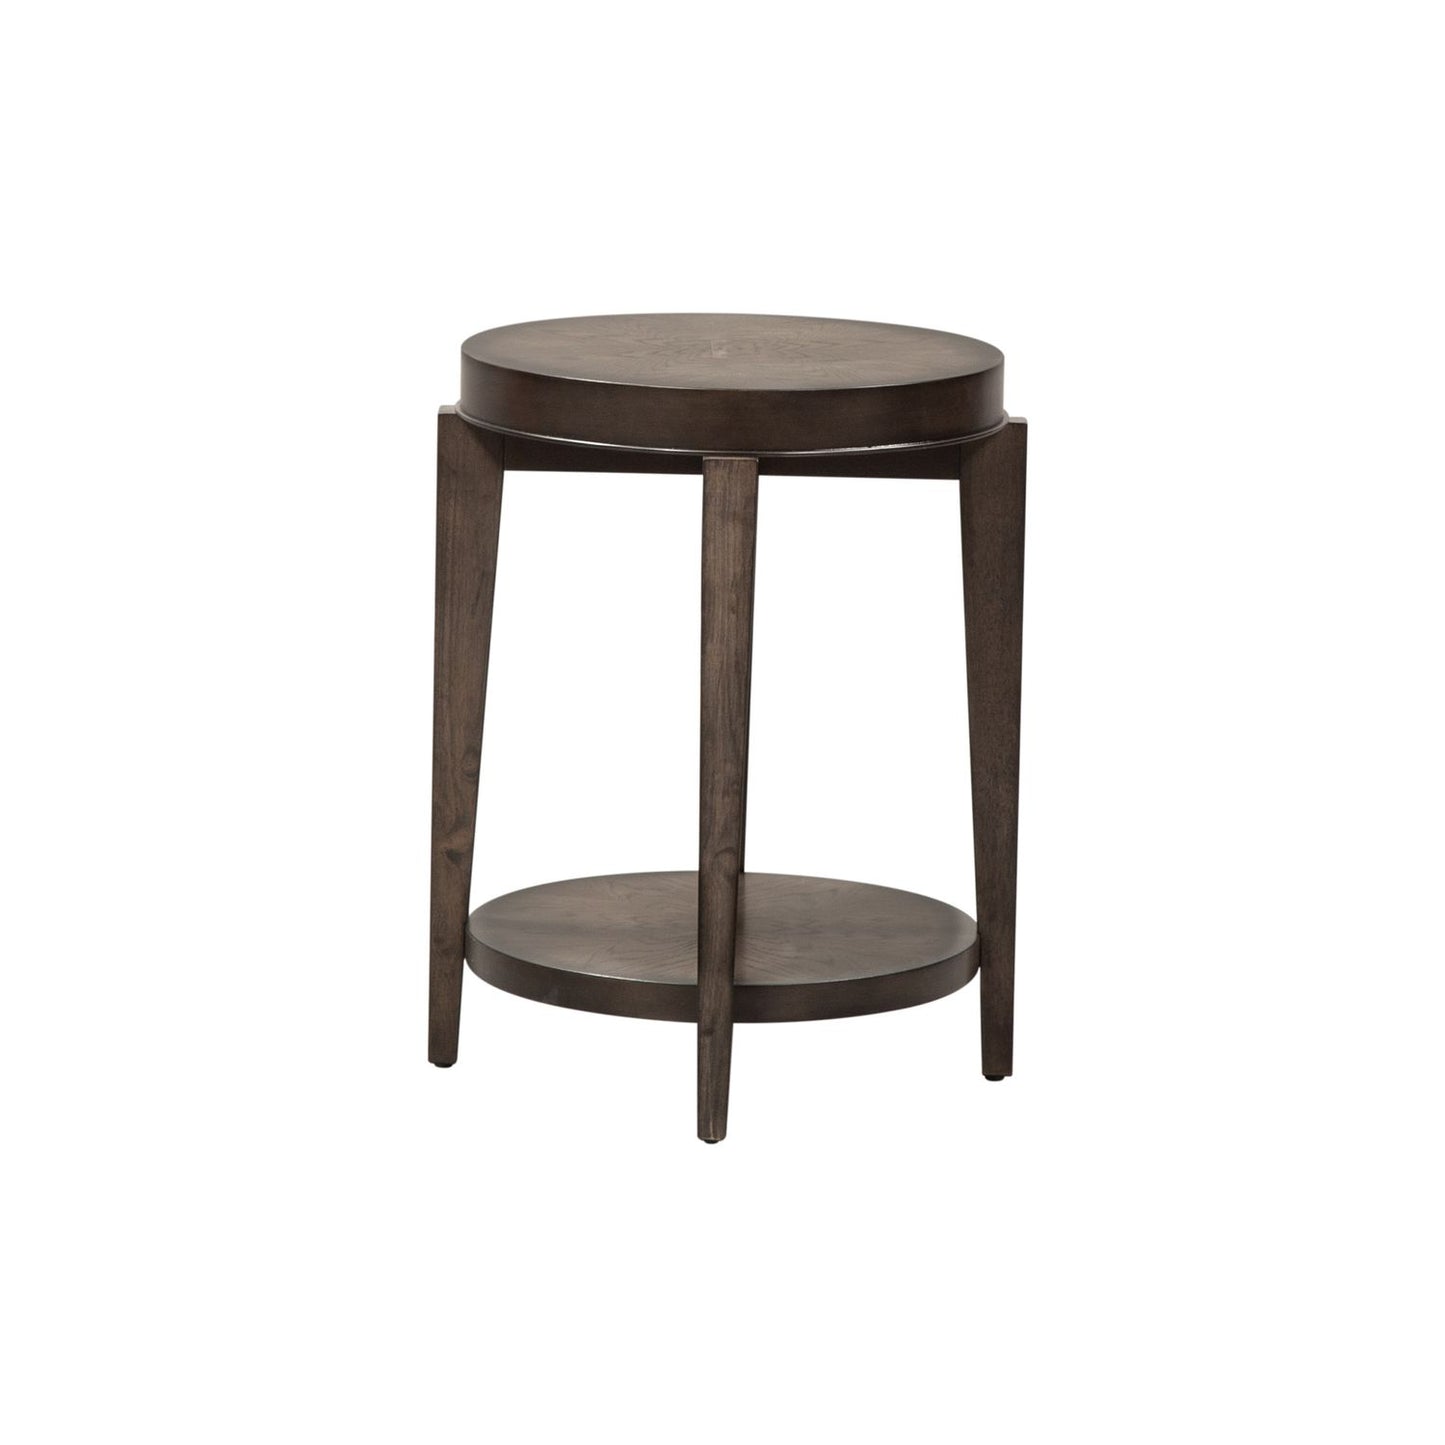 Penton - Oval Chair Side Table